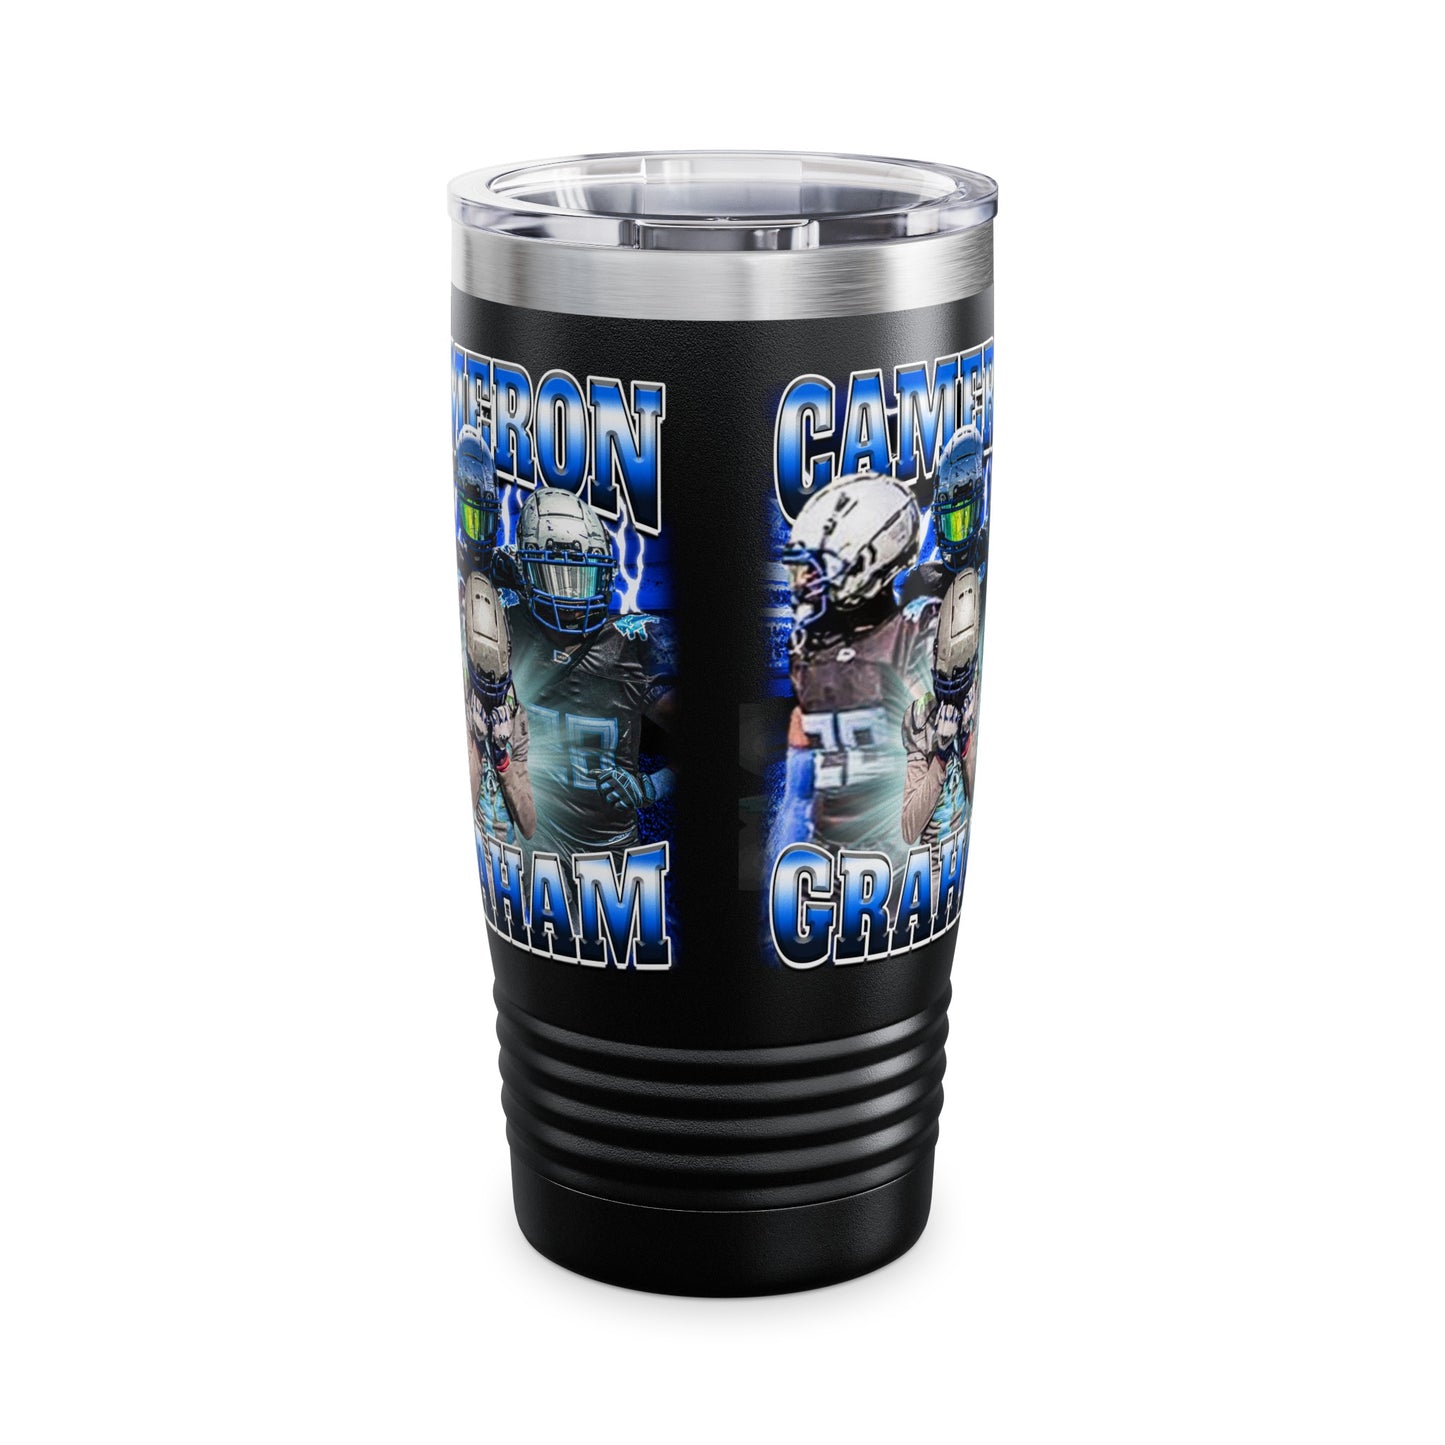 Cameron Graham Stainless Steal Tumbler